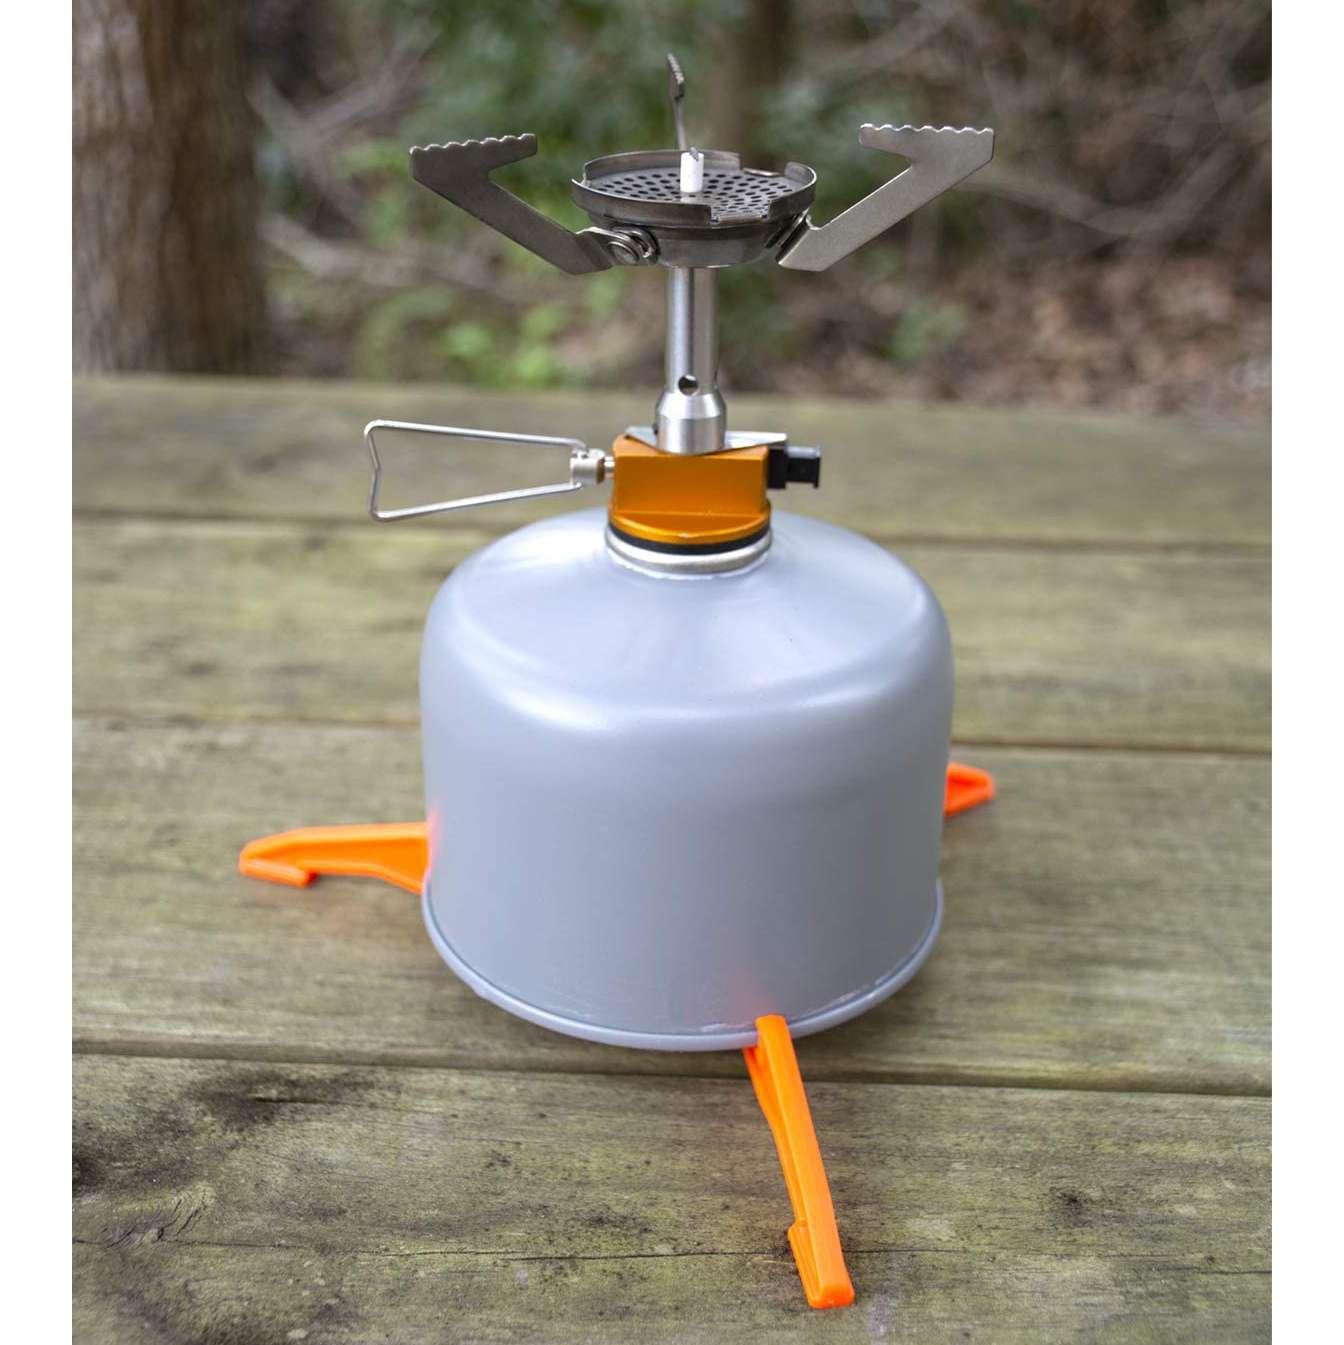 ust Trekker Stove with Collapsible Design